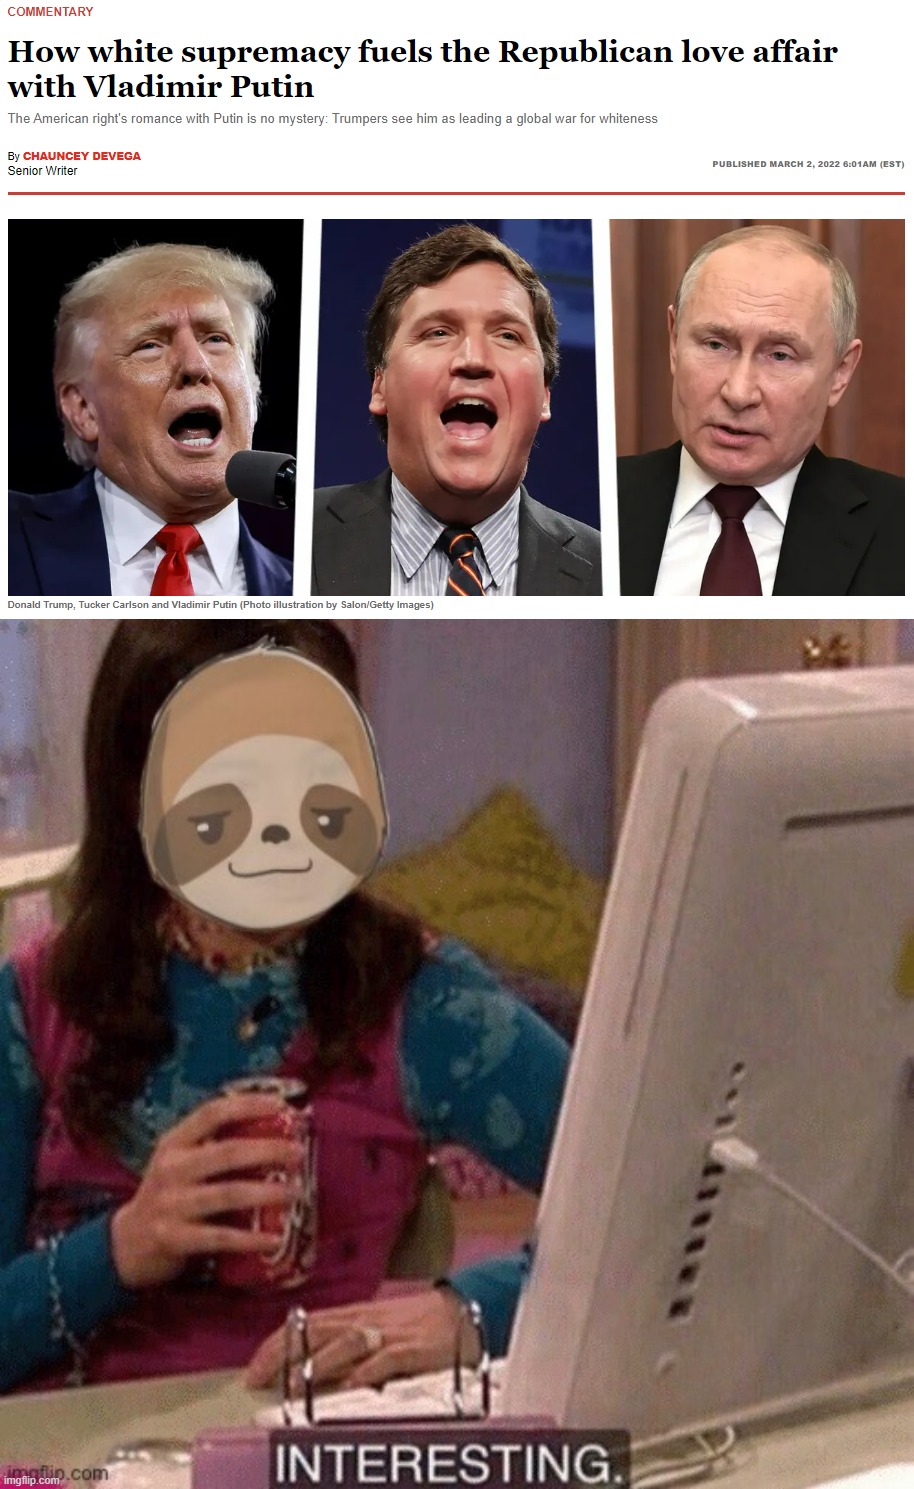 Things that make you go yeah that makes sense | image tagged in white supremacist putin supporters,sloth interesting,putin,tucker carlson,donald trump,white supremacy | made w/ Imgflip meme maker